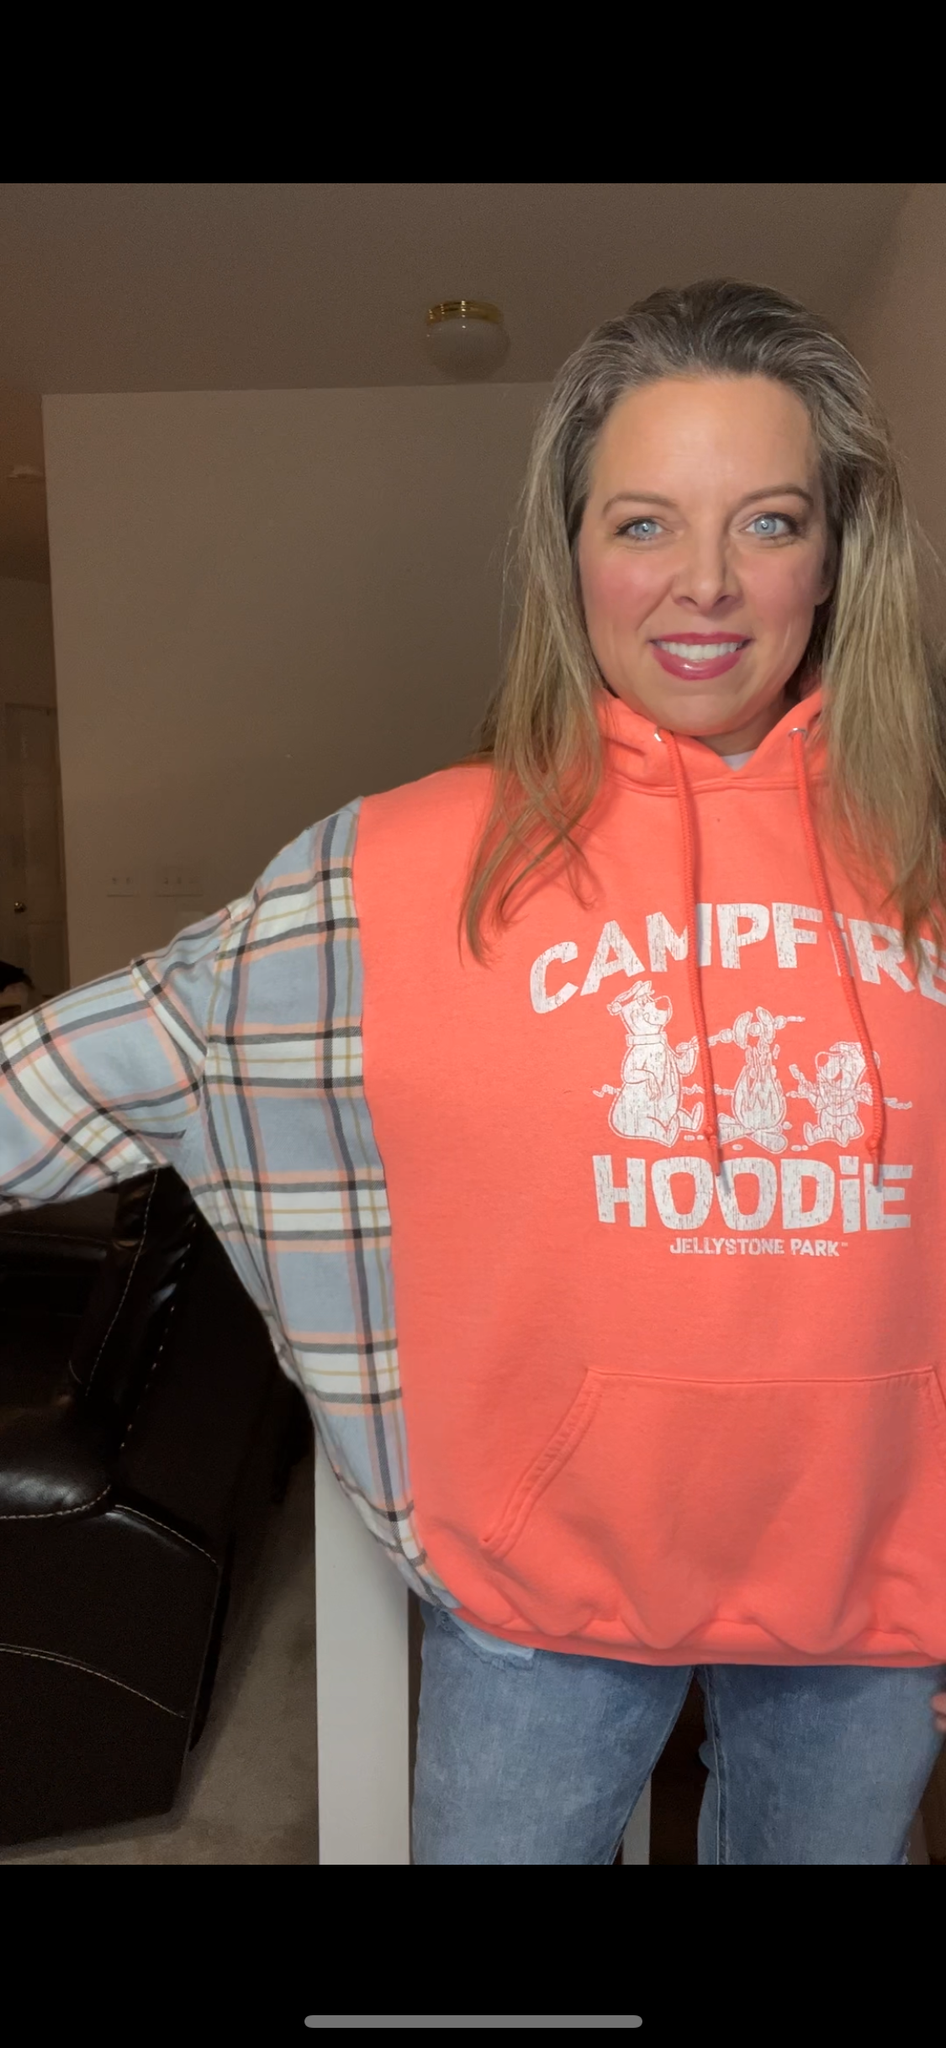 Upcycled Campfire Sweatshirt women’s XL/1X – midweight sweatshirt with soft flannel sleeves